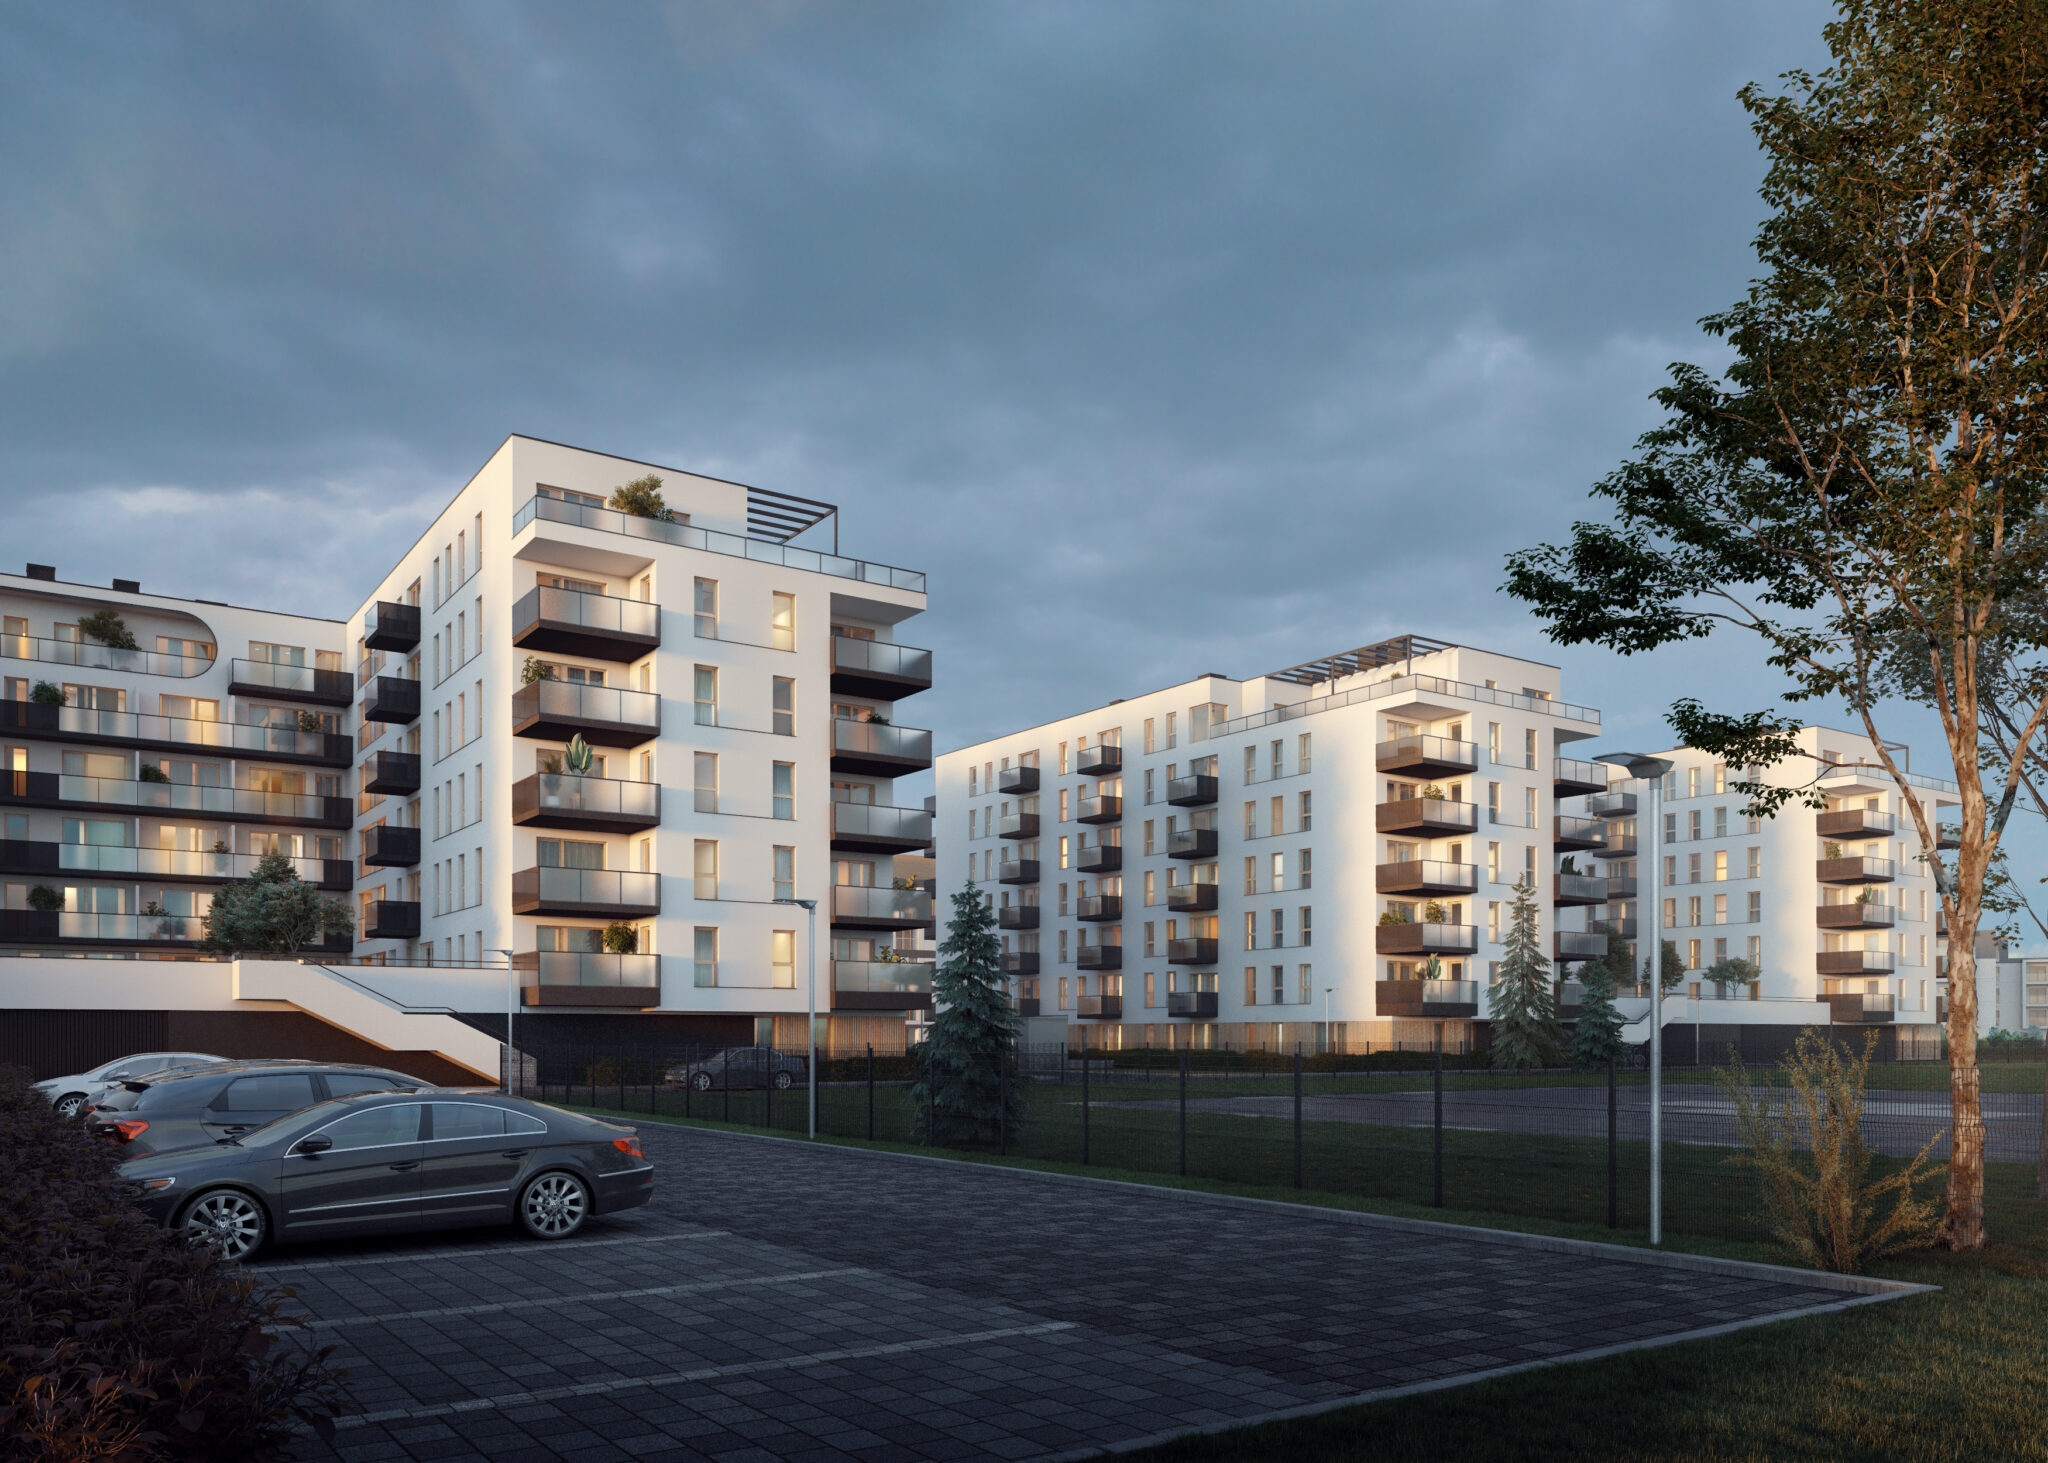 Architectural Visualizations of Residential Complex